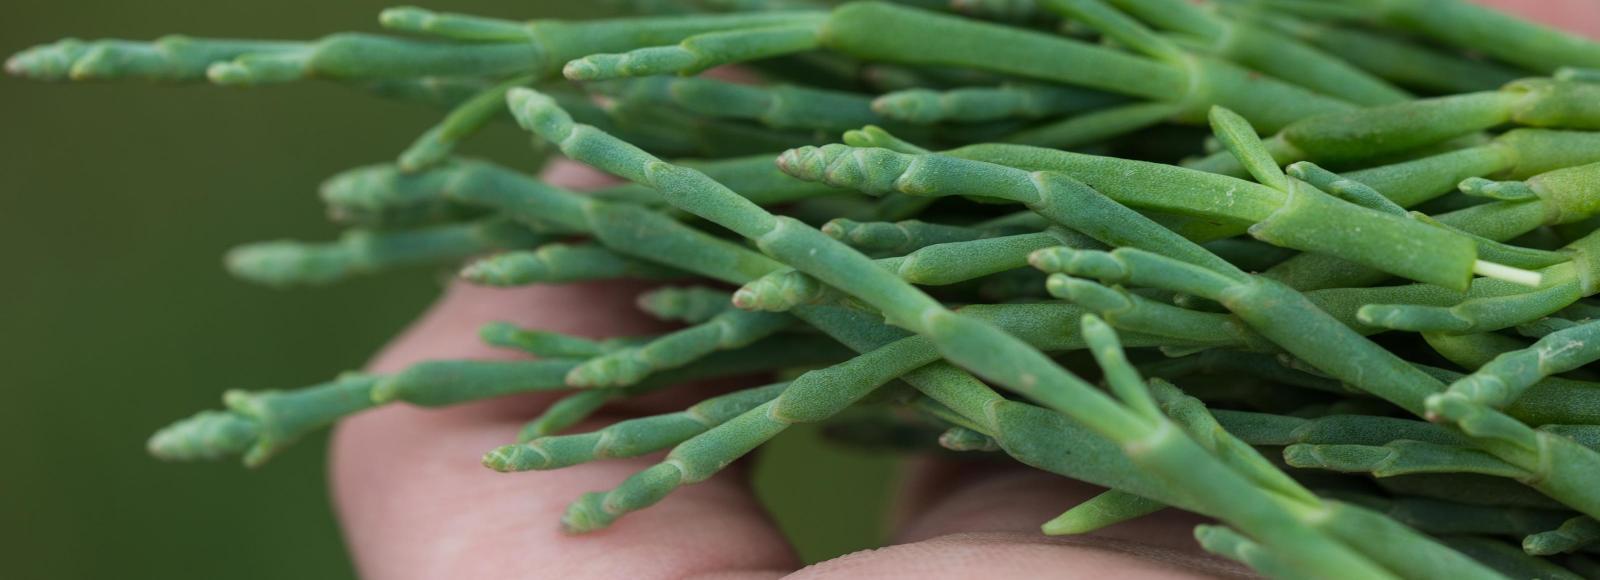 Close-up of fresh, bright green sea asparagus stems held by a hand barely pictured